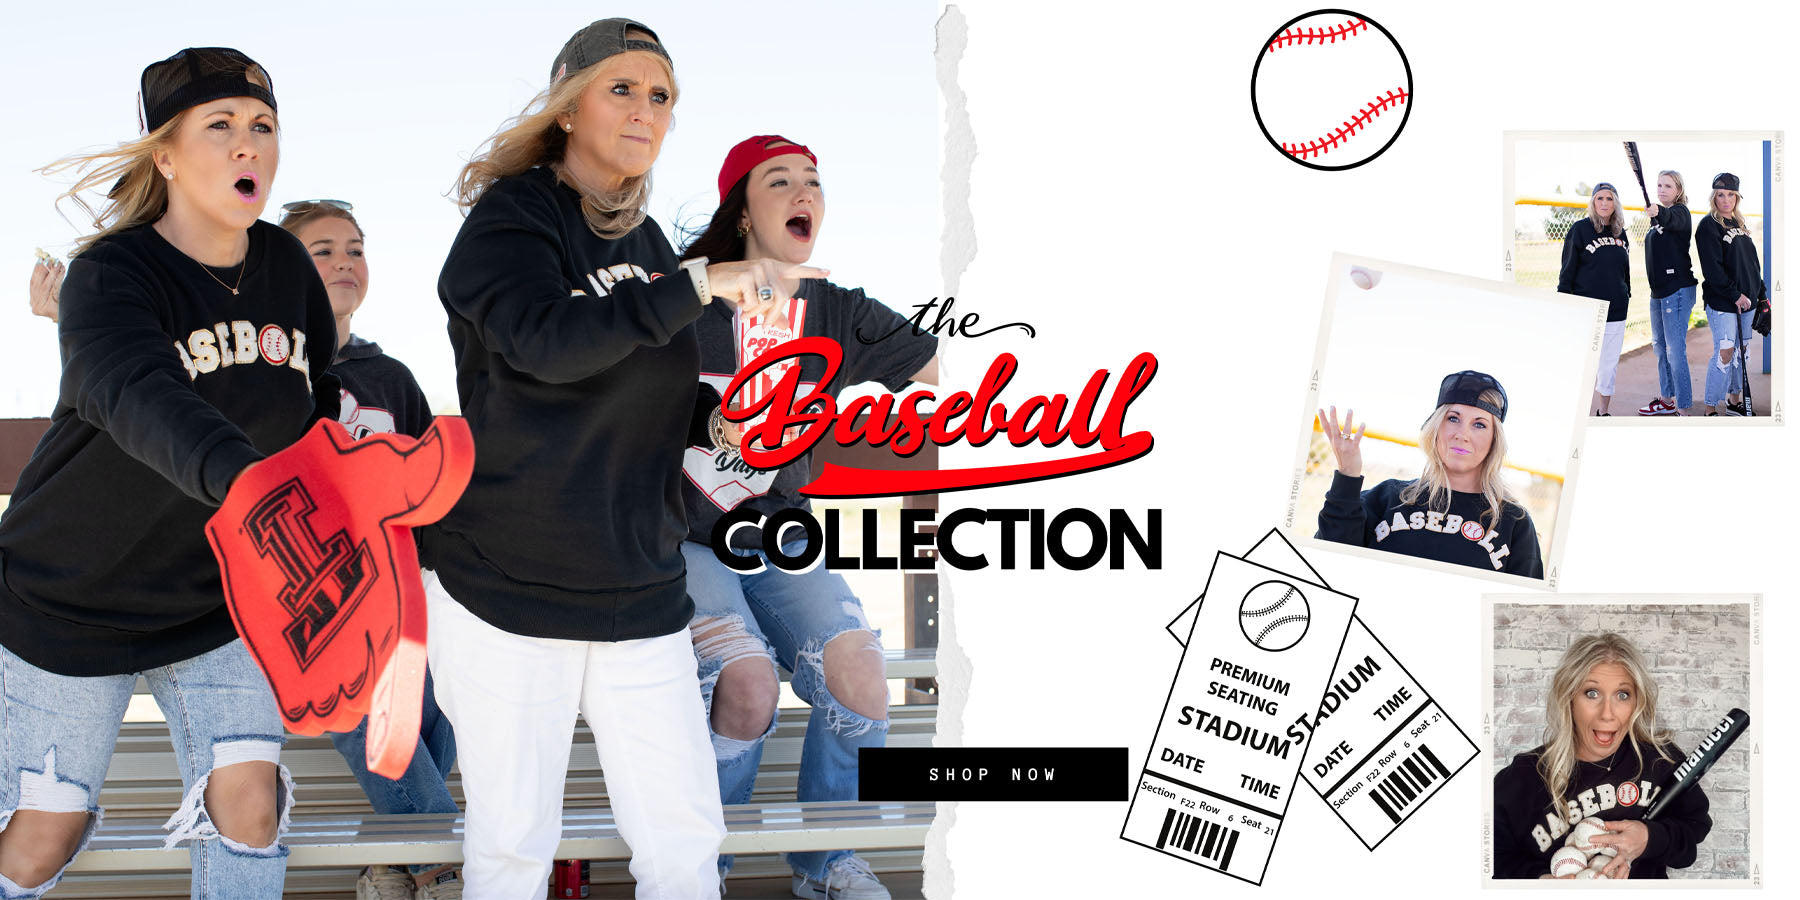 The Baseball Collection website banner. 